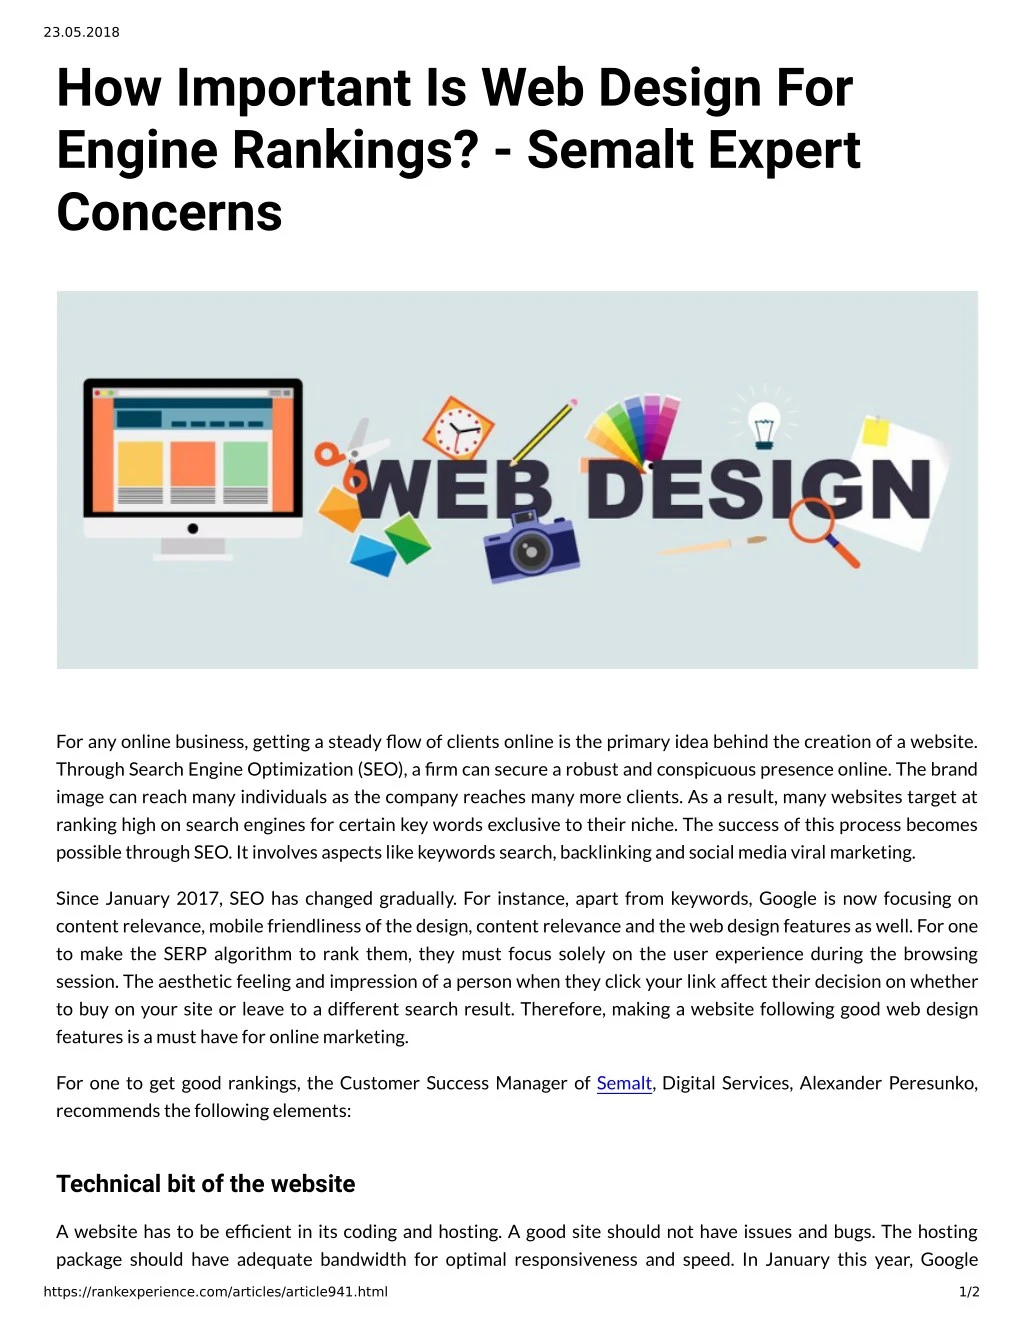 23 05 2018 how important is web design for engine